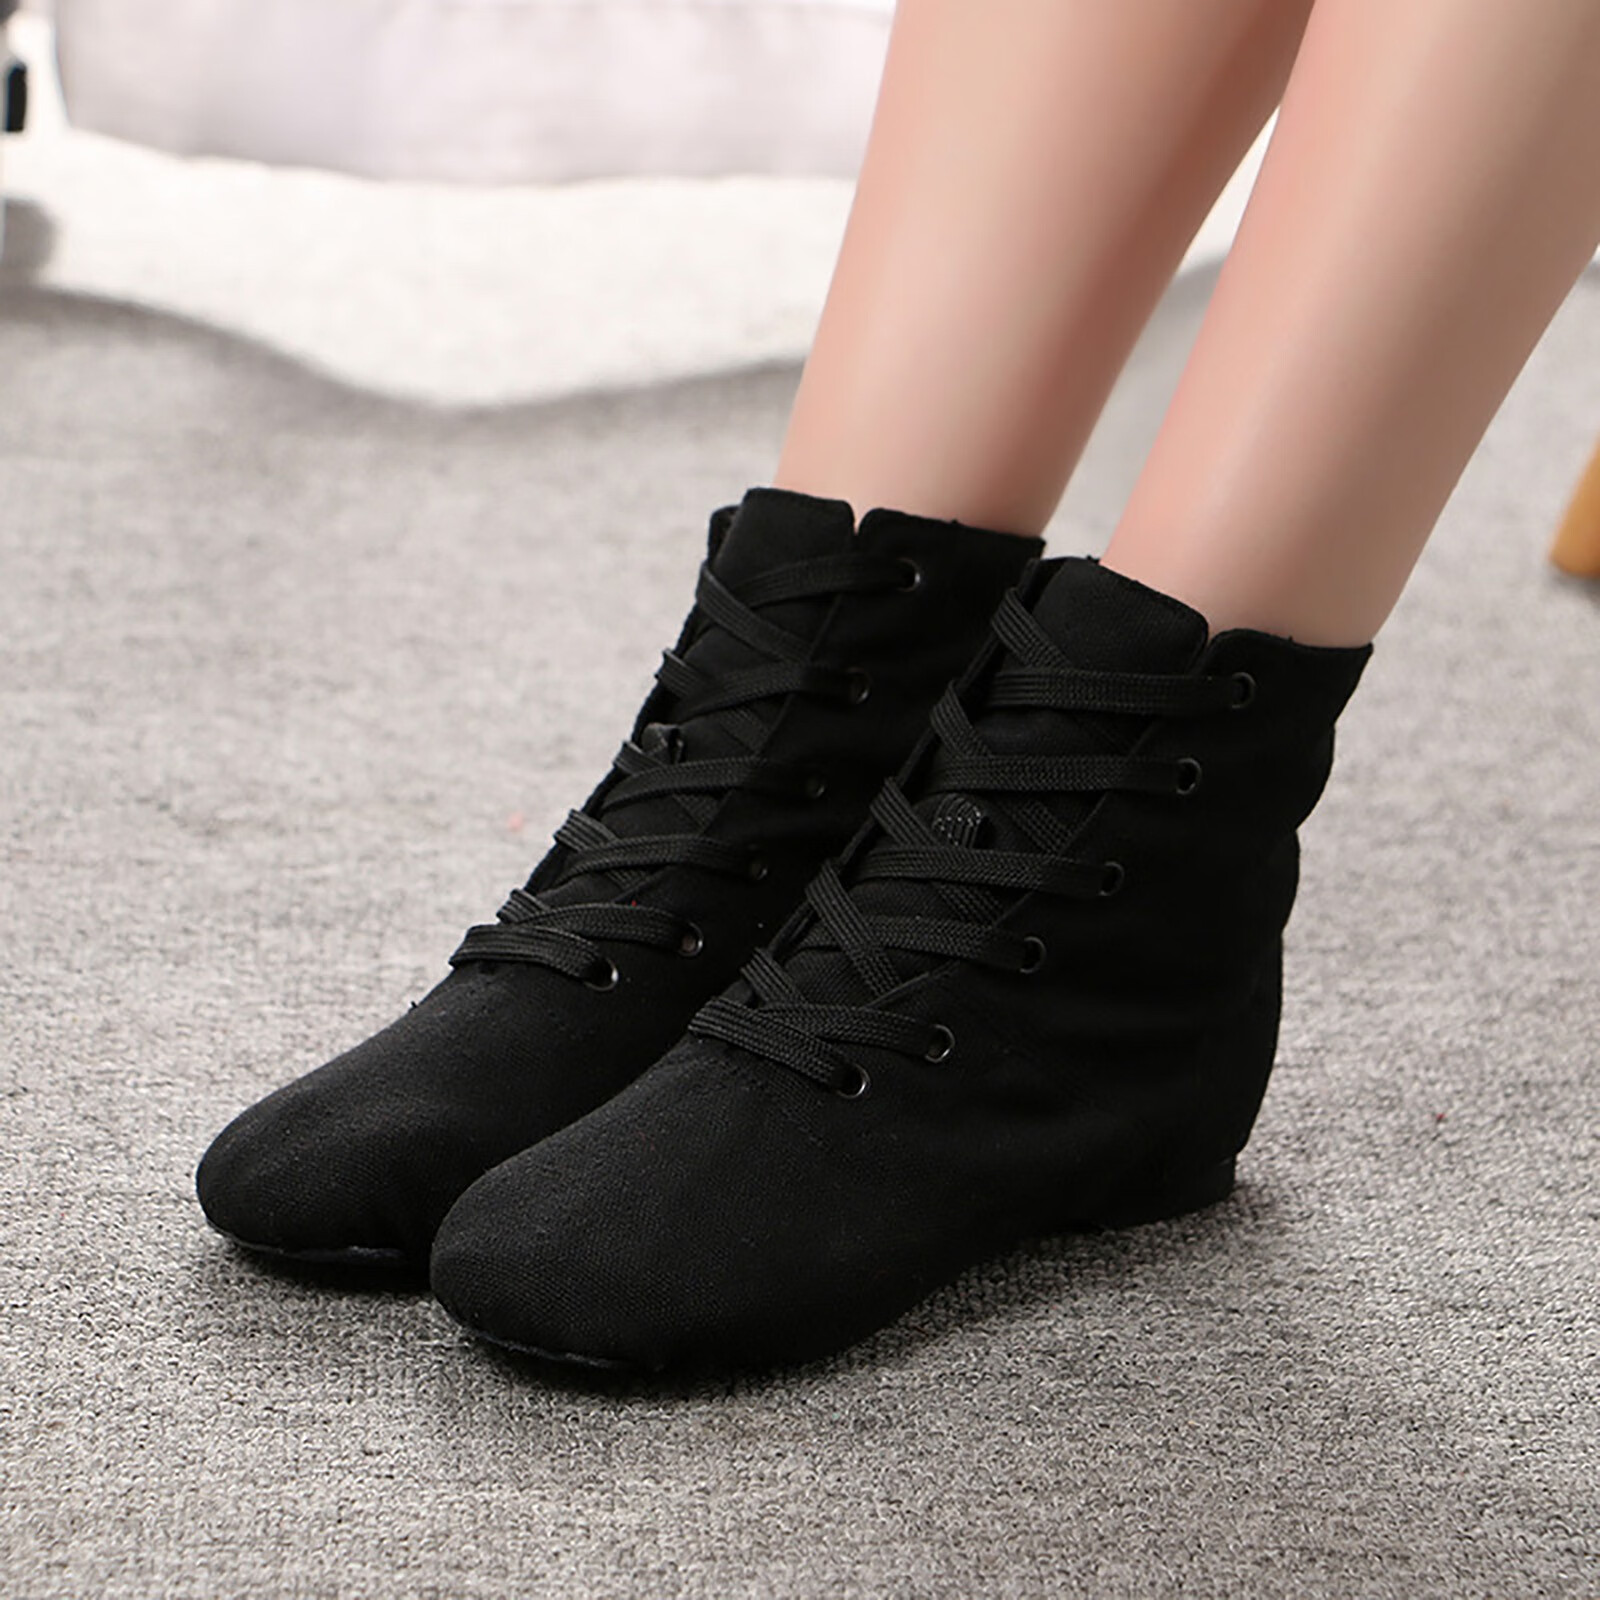 Casual Shoes for Women Women'S Canvas Dance Shoes Soft Soled Training Shoes Ballet Shoes Casual Sandals Dance Shoes Women Casual Shoes Canvas Black 41 - image 2 of 6